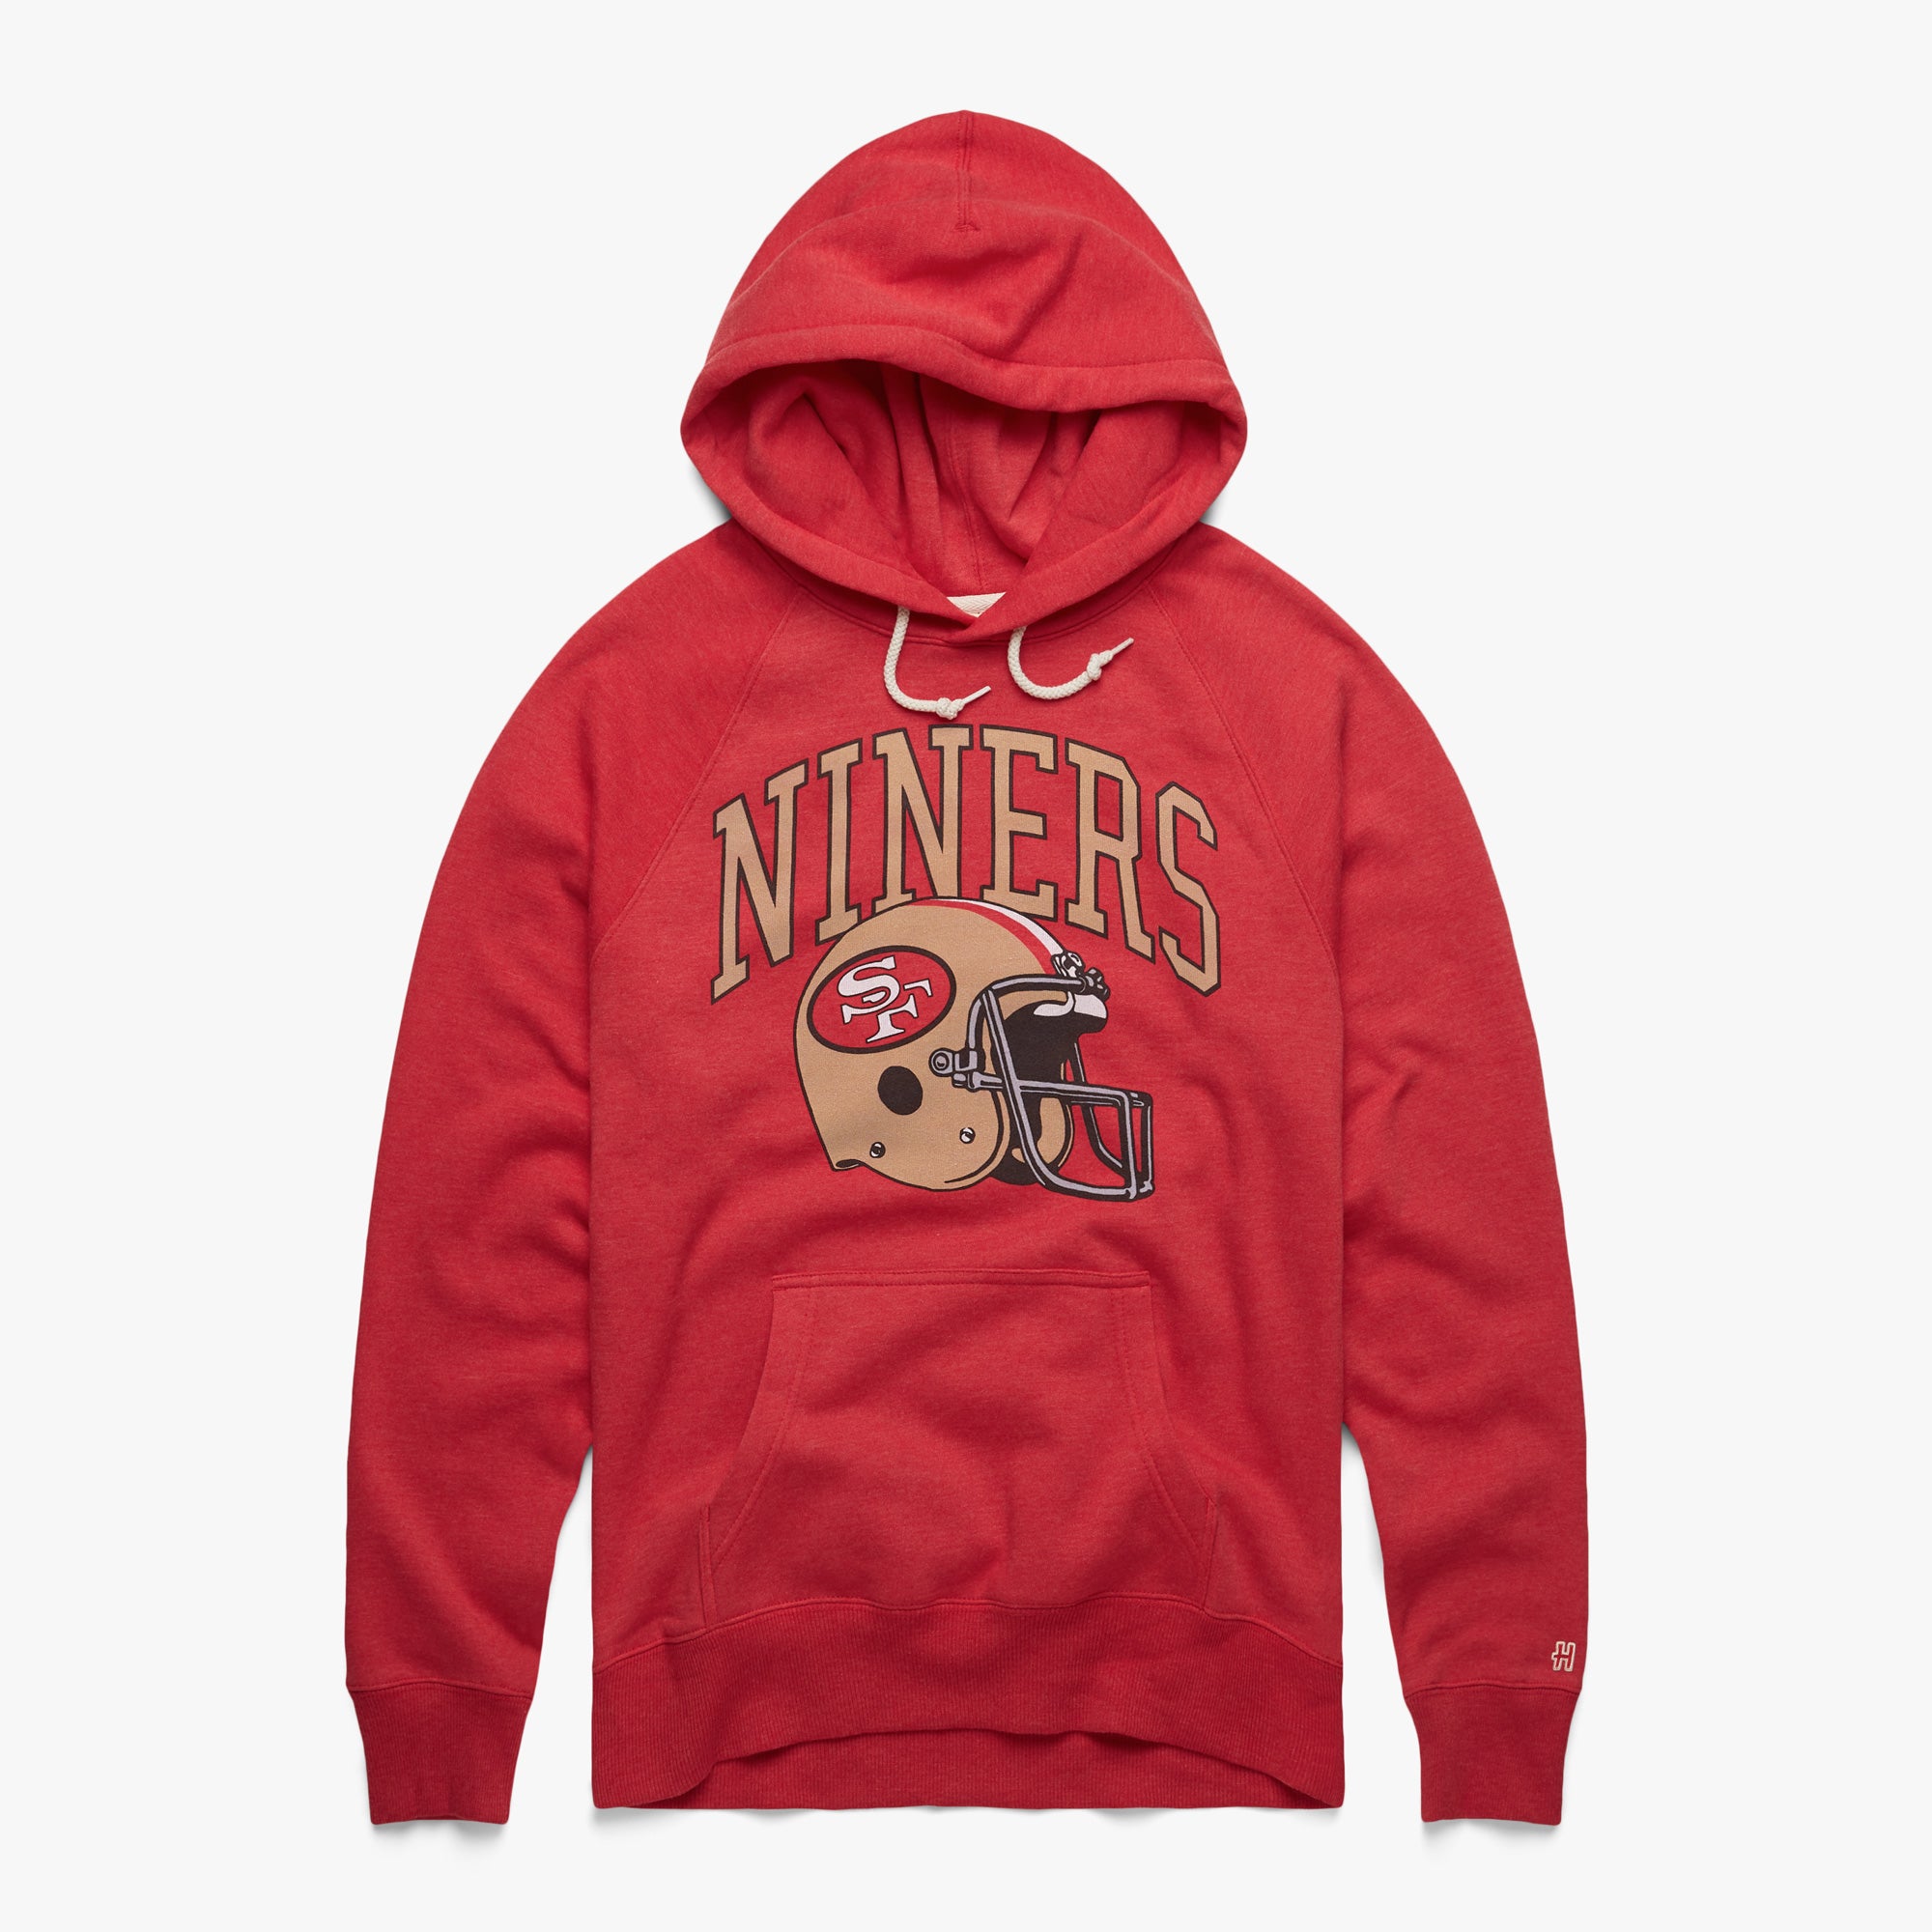 San Francisco 49ers Helmet Retro Hoodie from Homage. | Officially Licensed Vintage NFL Apparel from Homage Pro Shop.